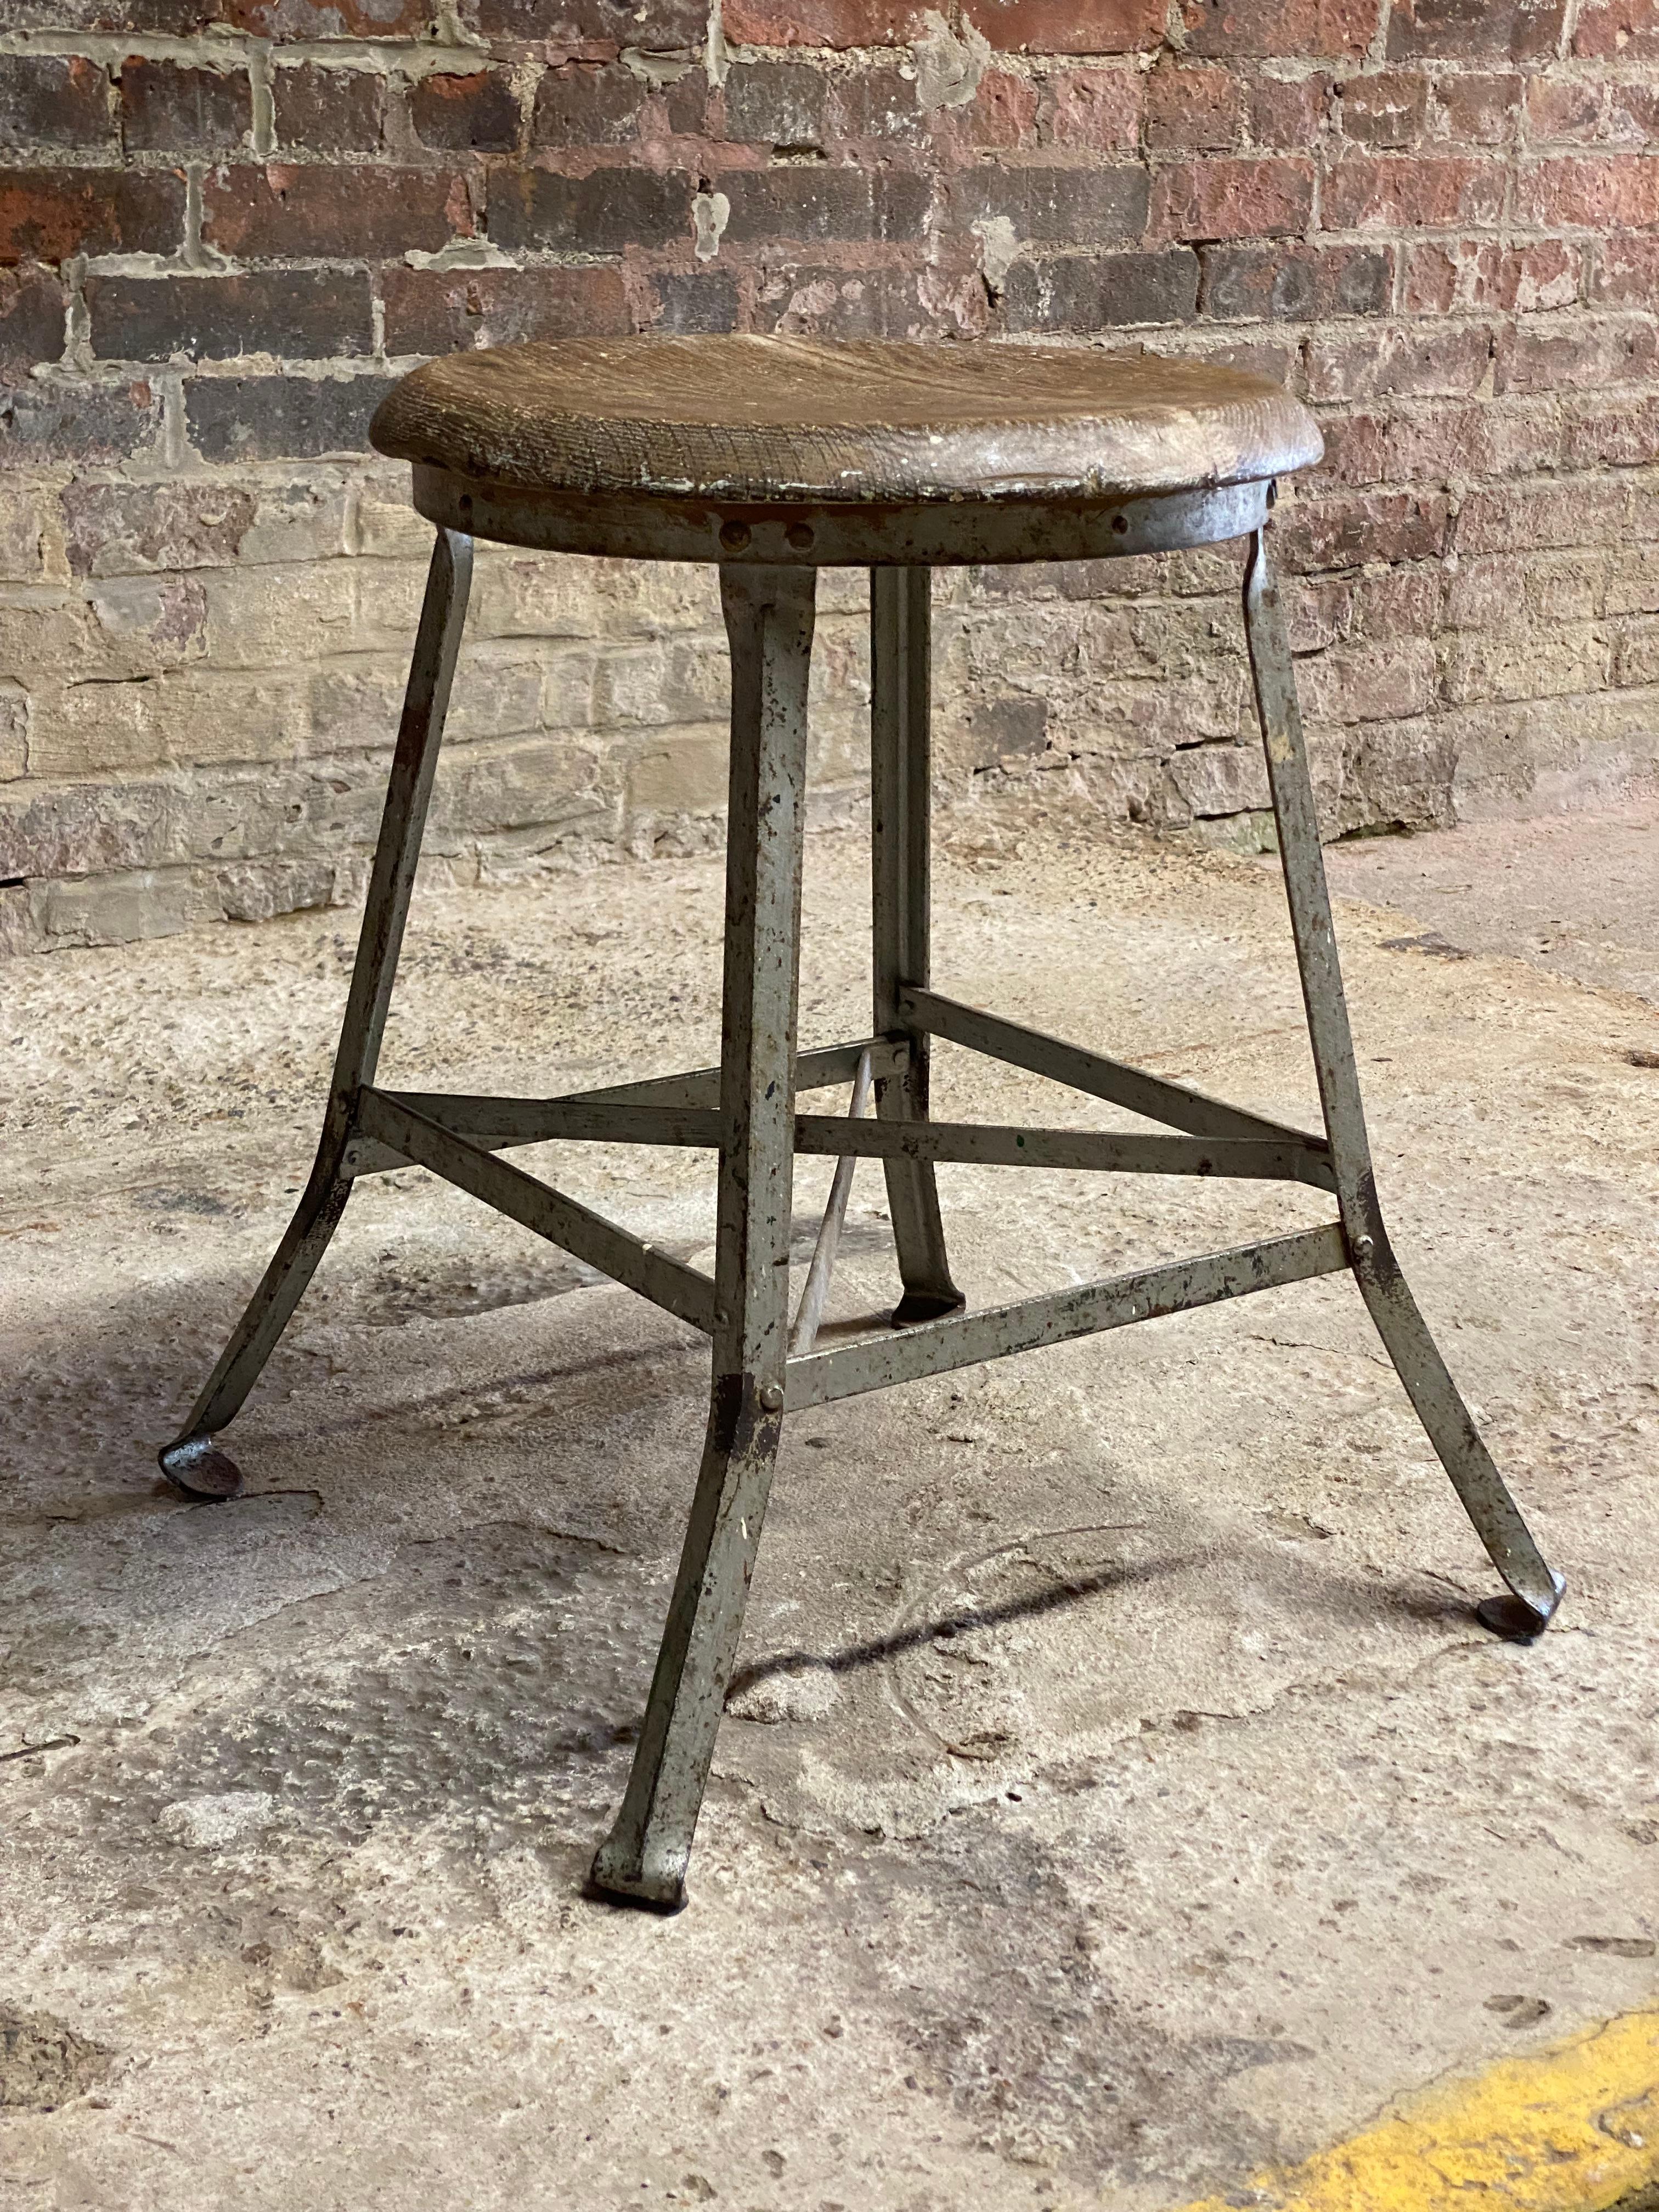 Period industrial low stool. Round oak seat with a steel base splayed legs with turned in feet. X base stretcher for maximum durability and strength. Circa 1910-1930. Good overall condition with cosmetic wear. Weathered with minor rust, finish